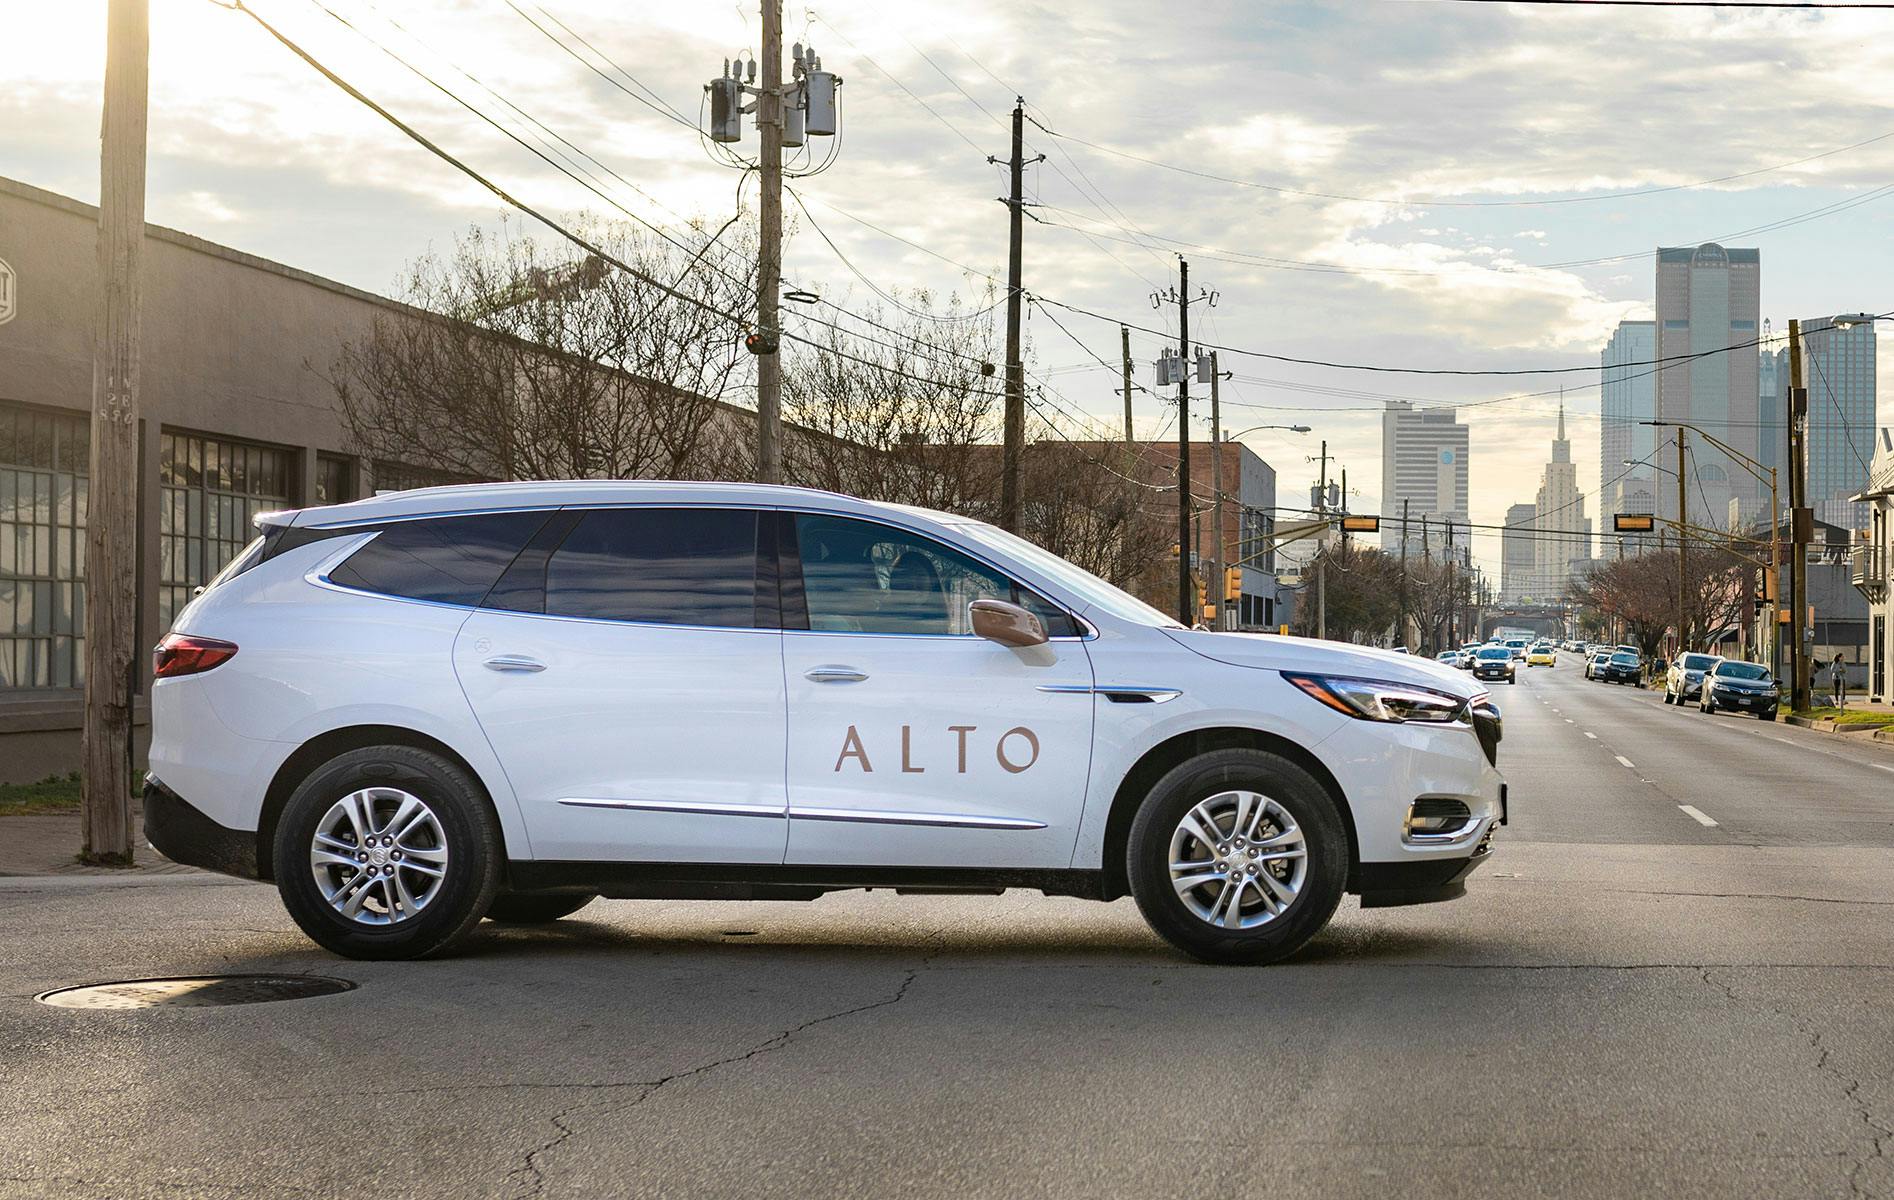 Dallas rideshare Alto partners with local artists